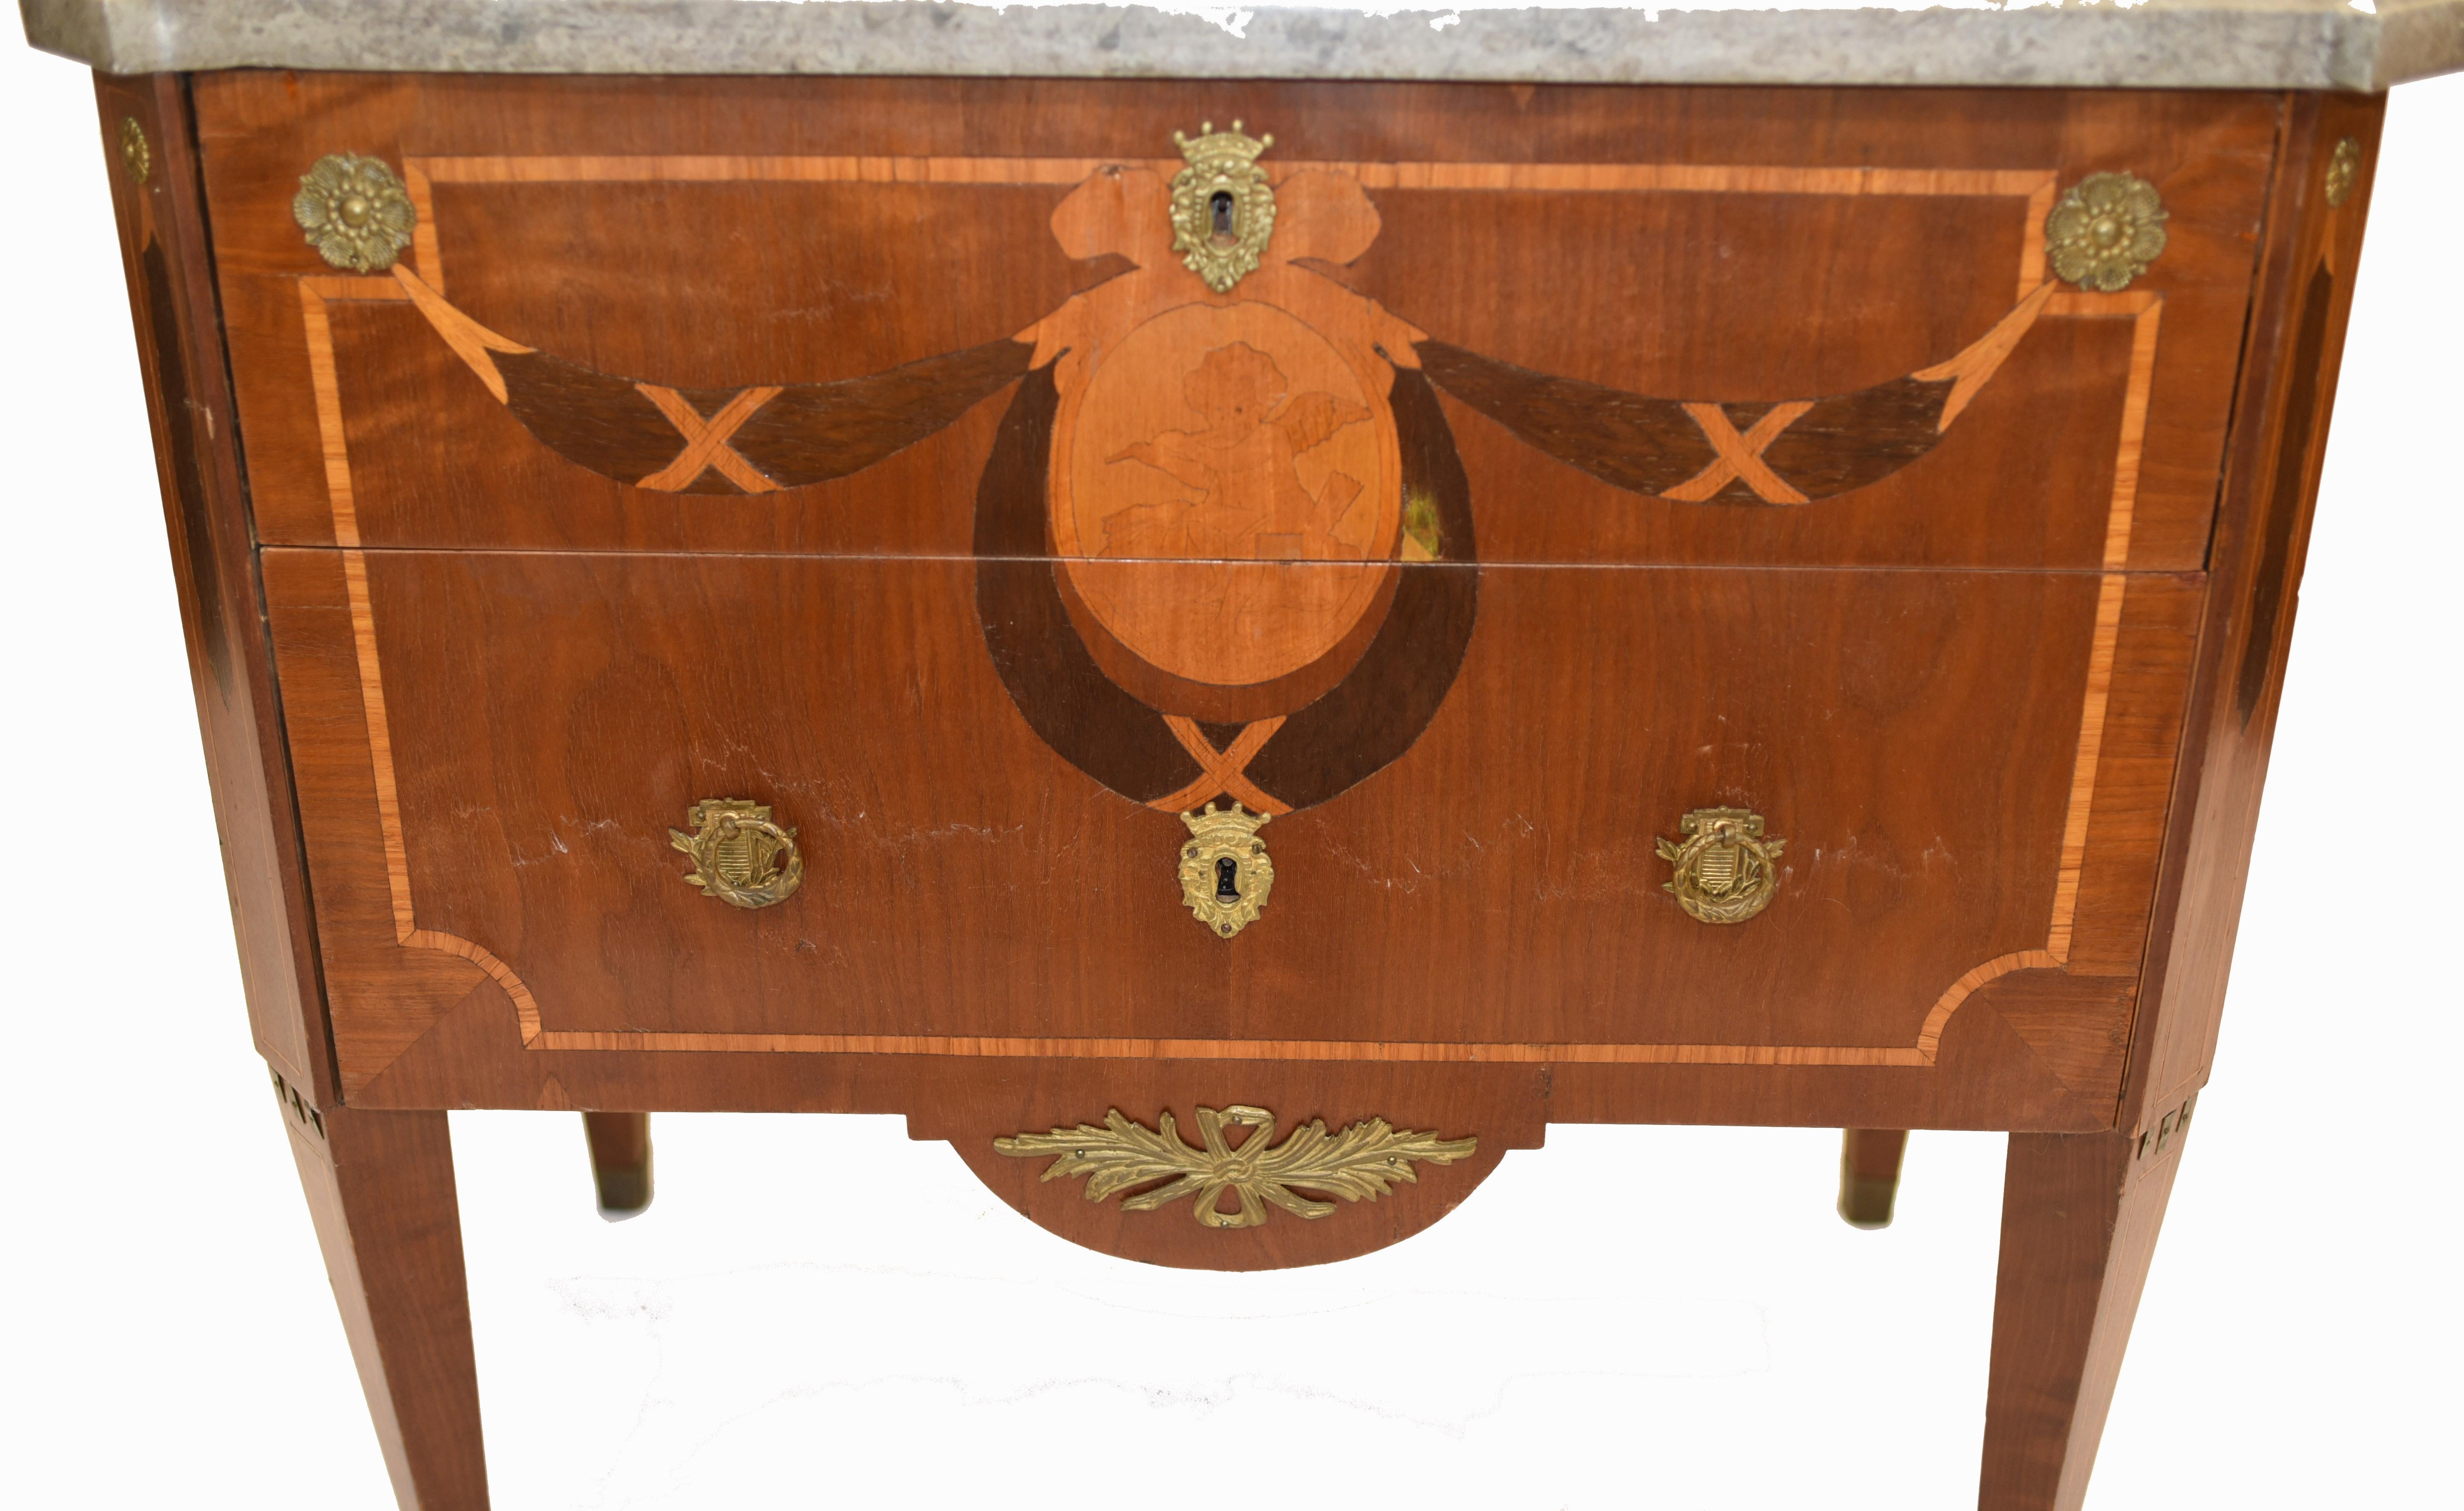 Early 20th Century French Empire Commode Chest of Drawers, Antique with Marquetry Inlay